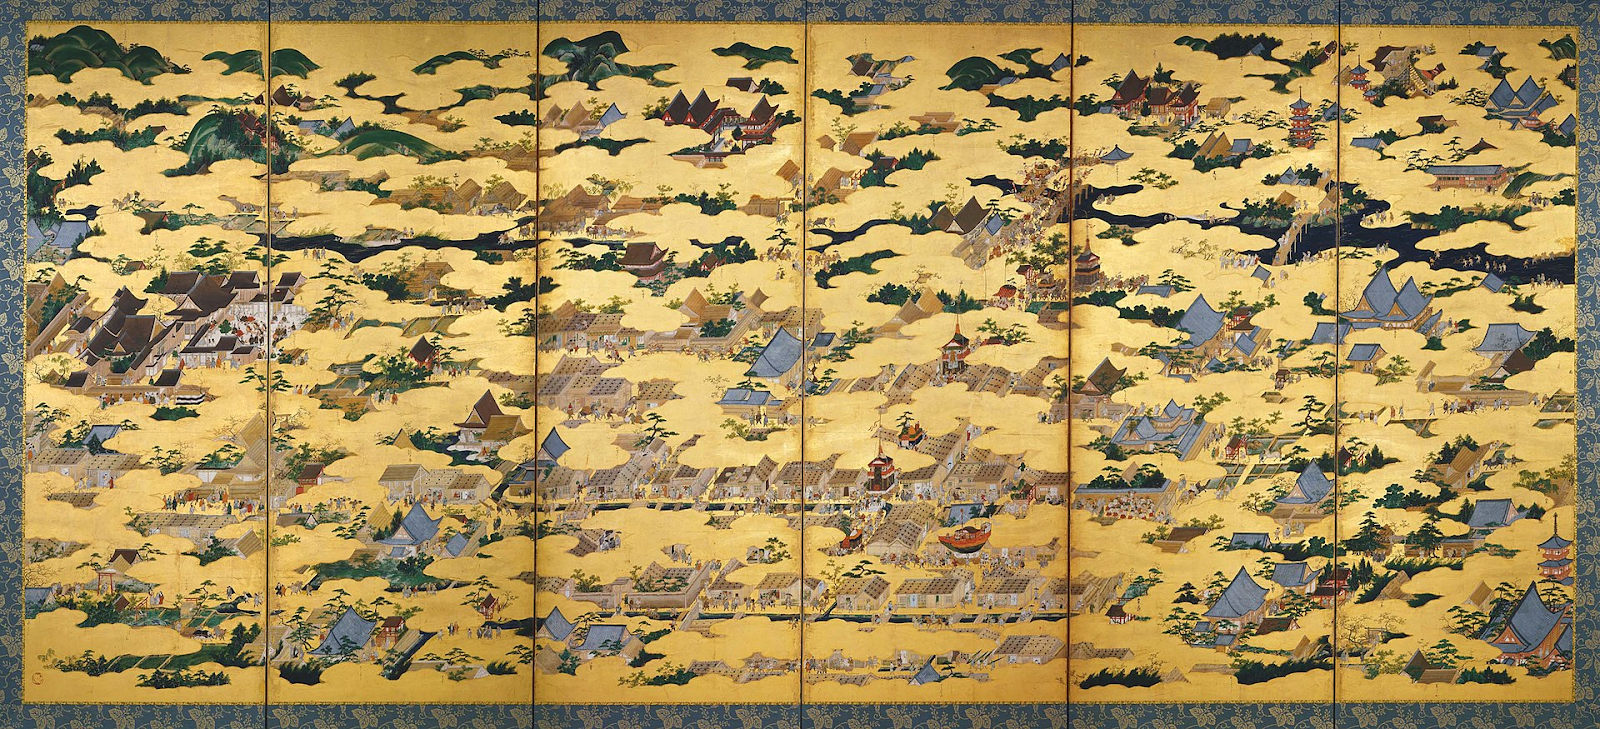 A first century depiction of Ancient Kyoto